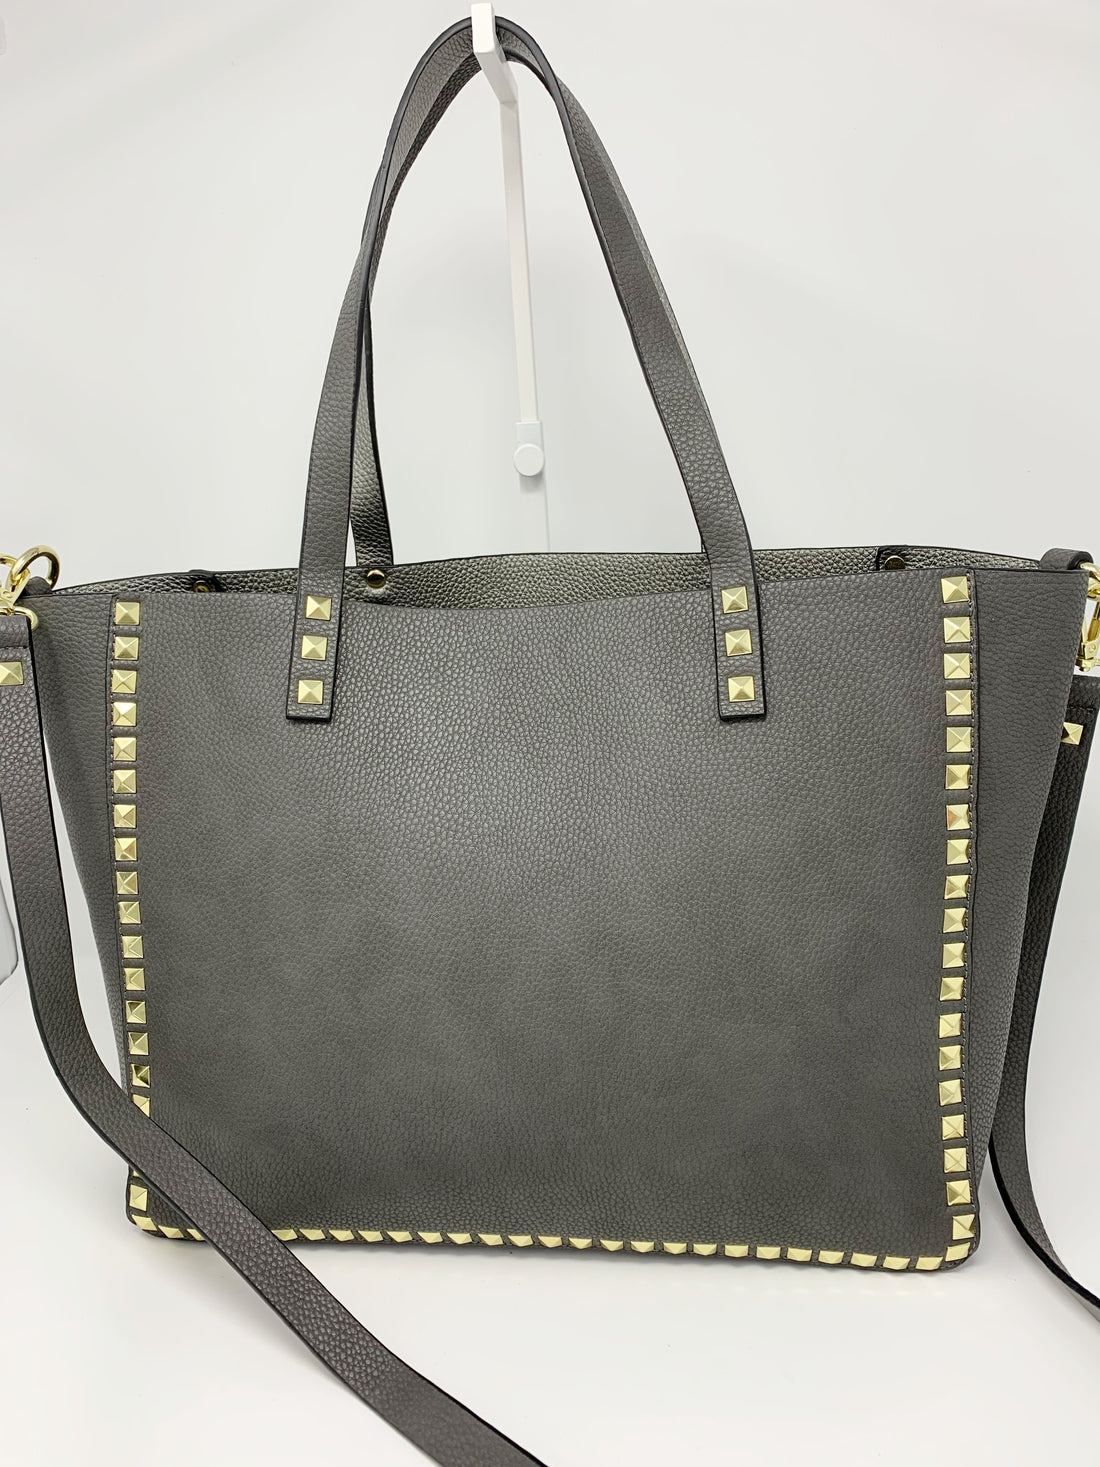 Large Studded Tote with Pouch in Dark Grey and Silver